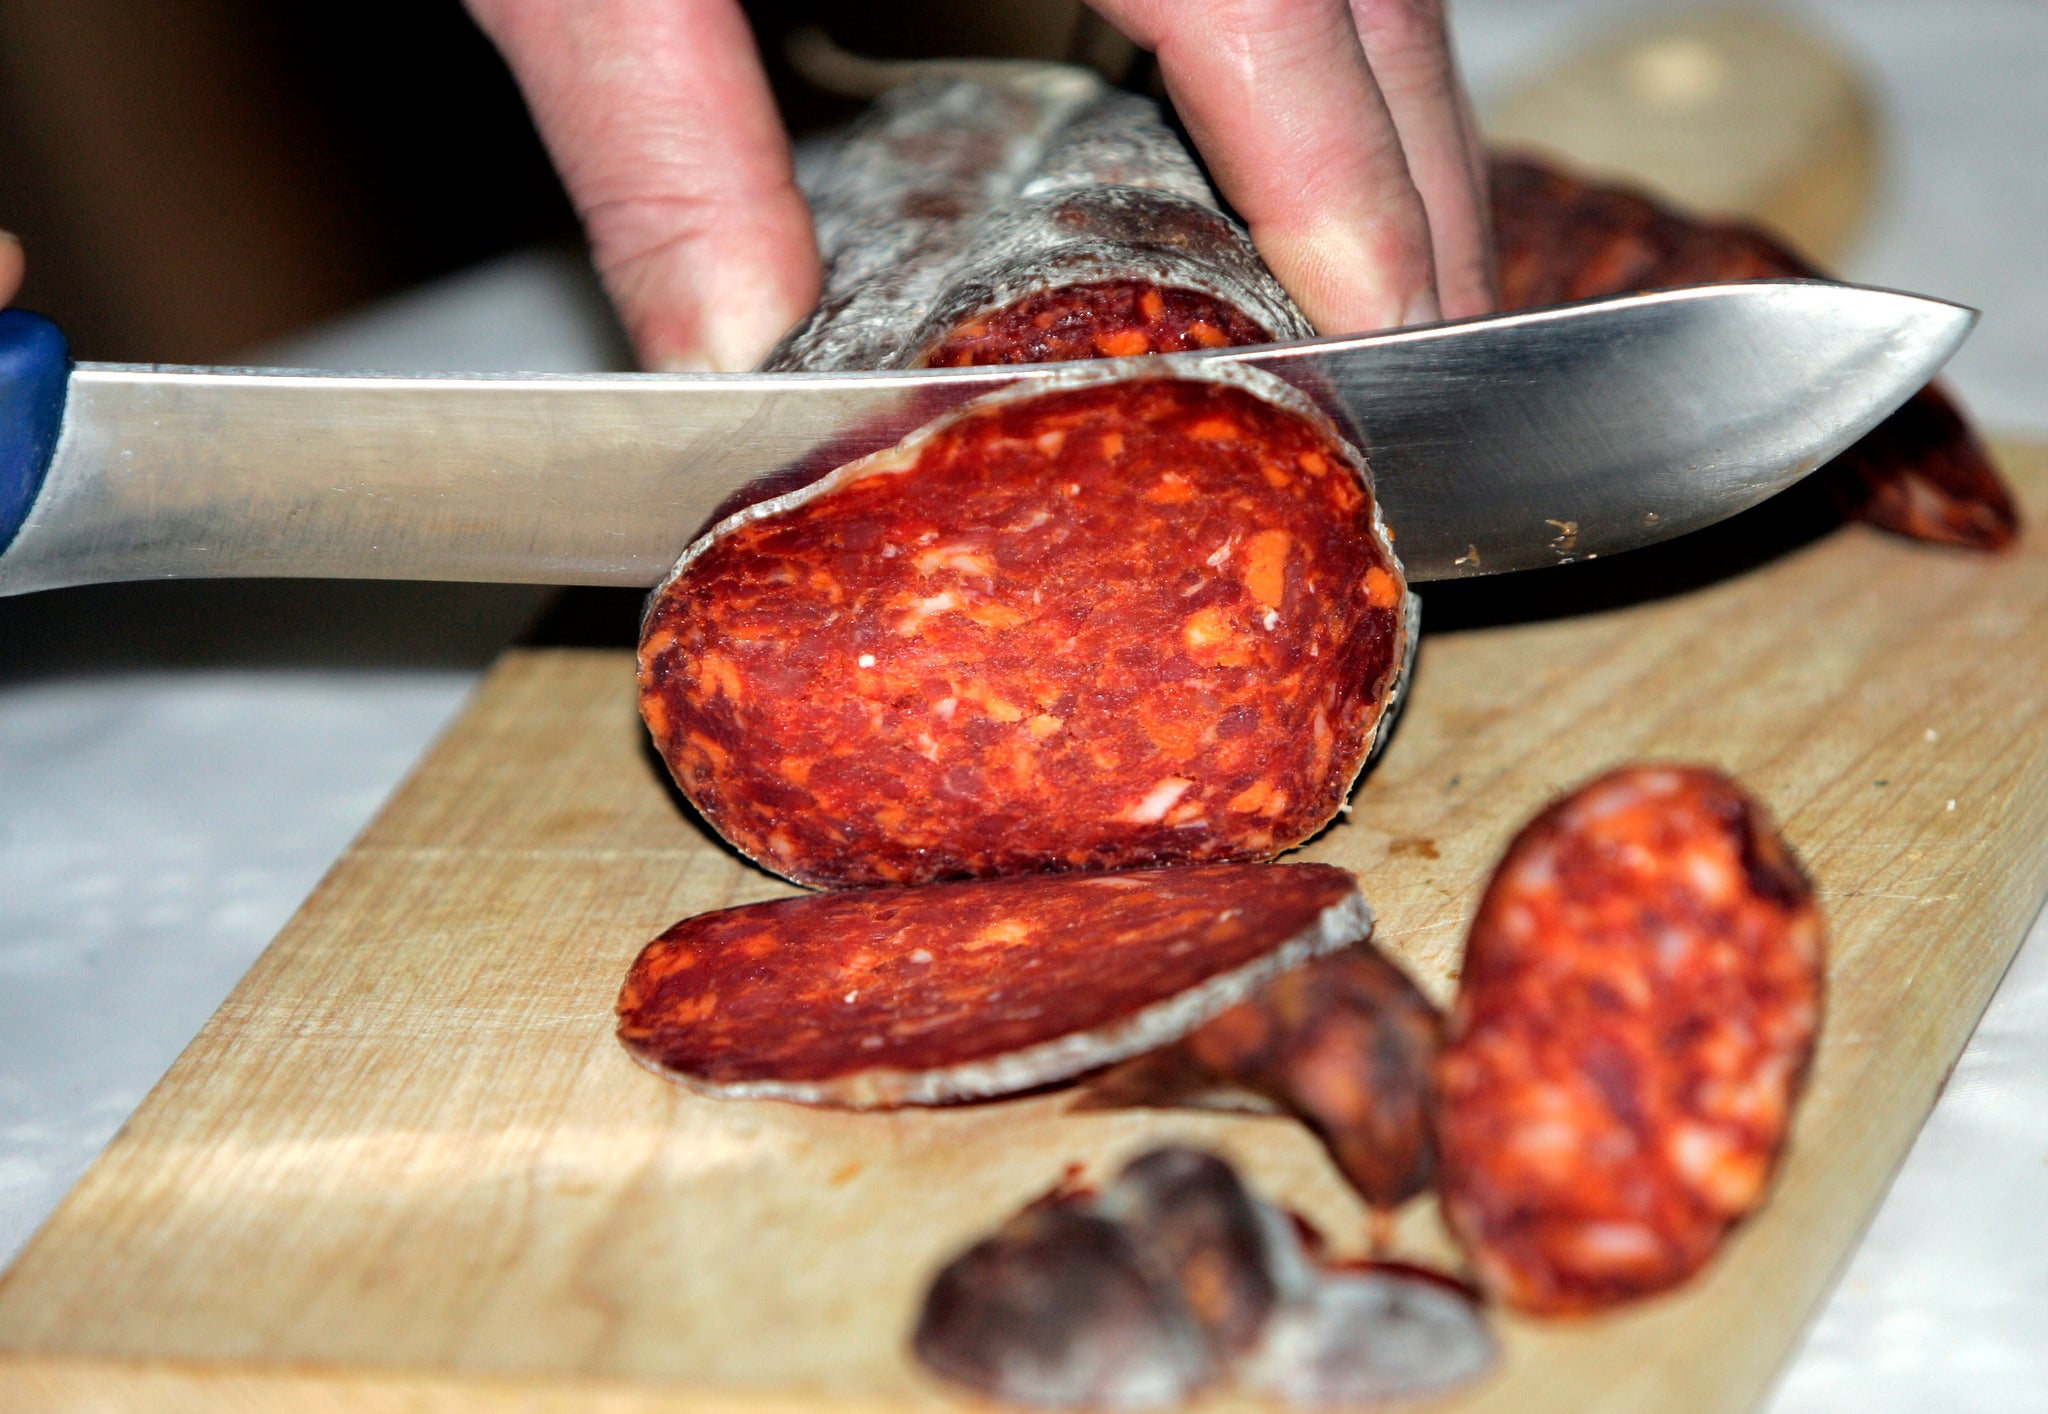 Bacterial fermentation is an essential part in making fatty pork sausages such as the 'kulen' variety (pictured).